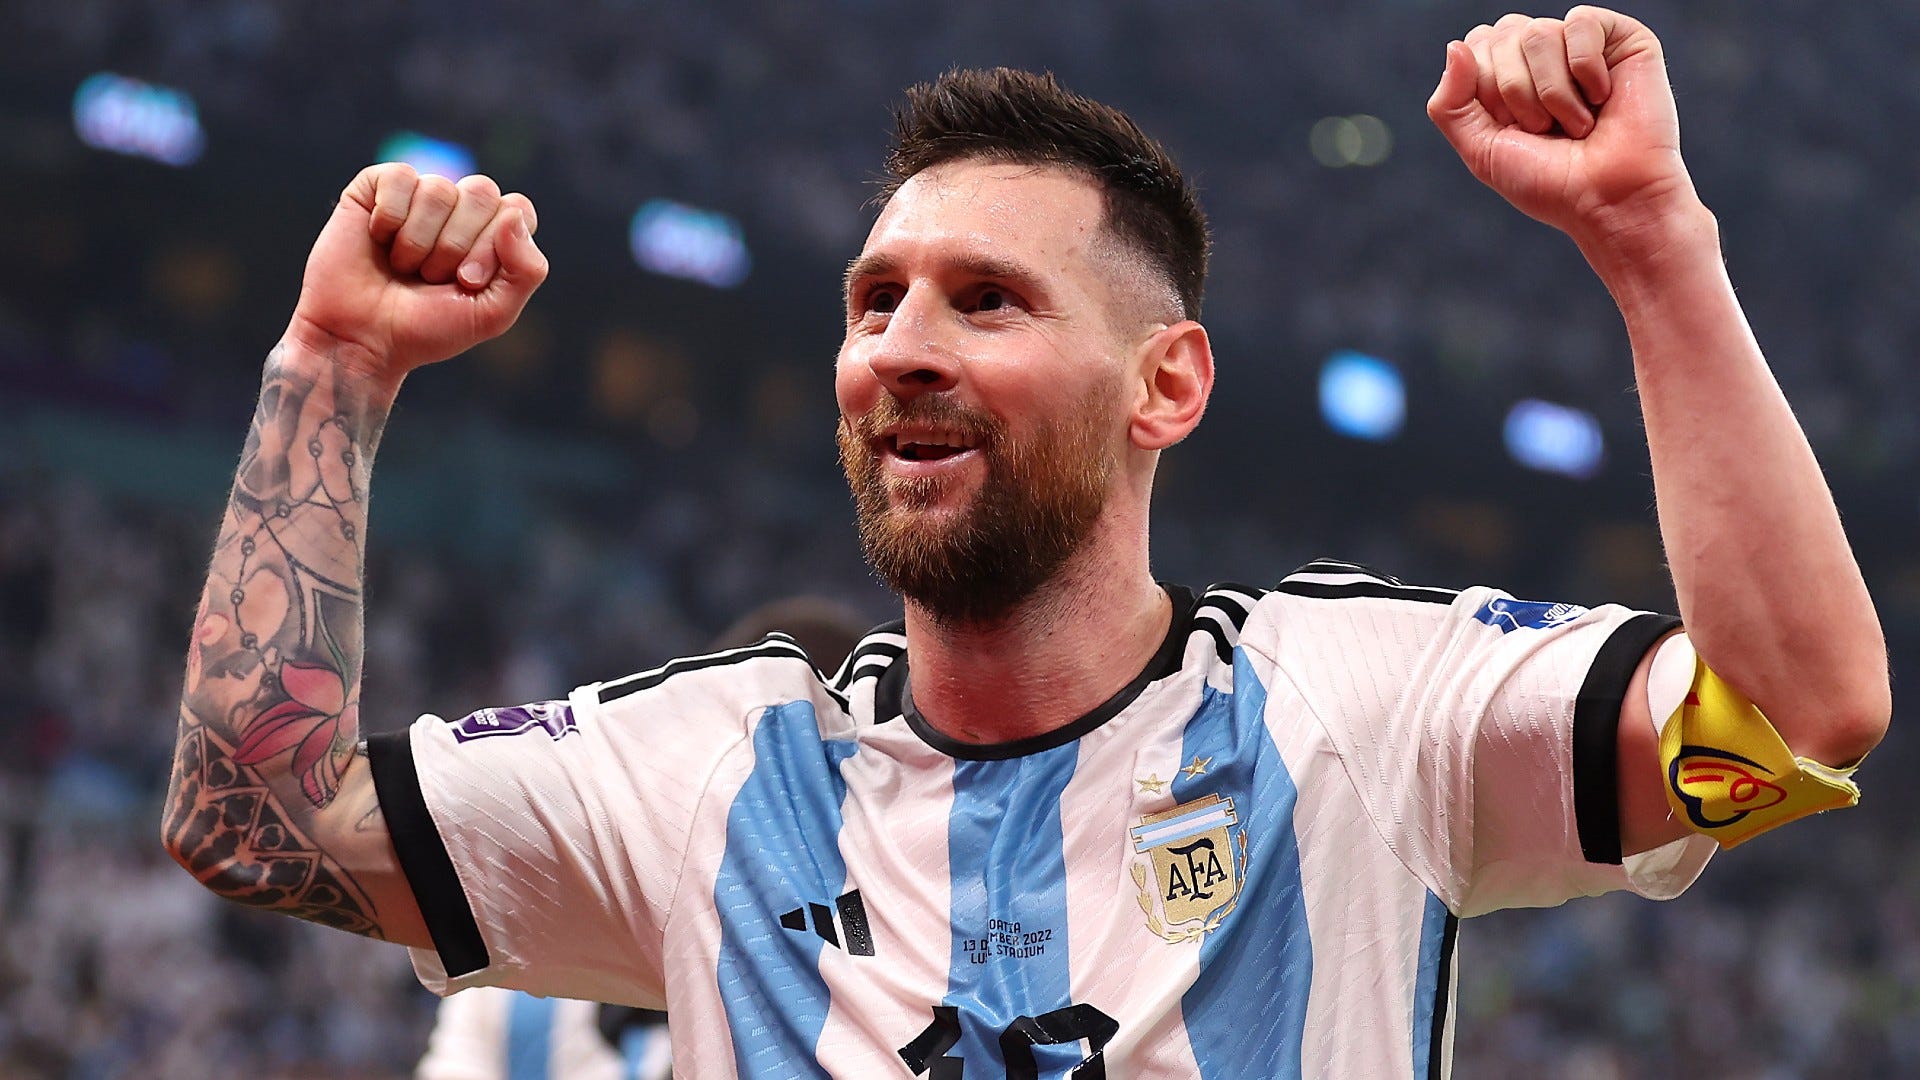 WATCH: Lionel Messi MOBBED by Argentina fans during restaurant visit in Buenos Aires